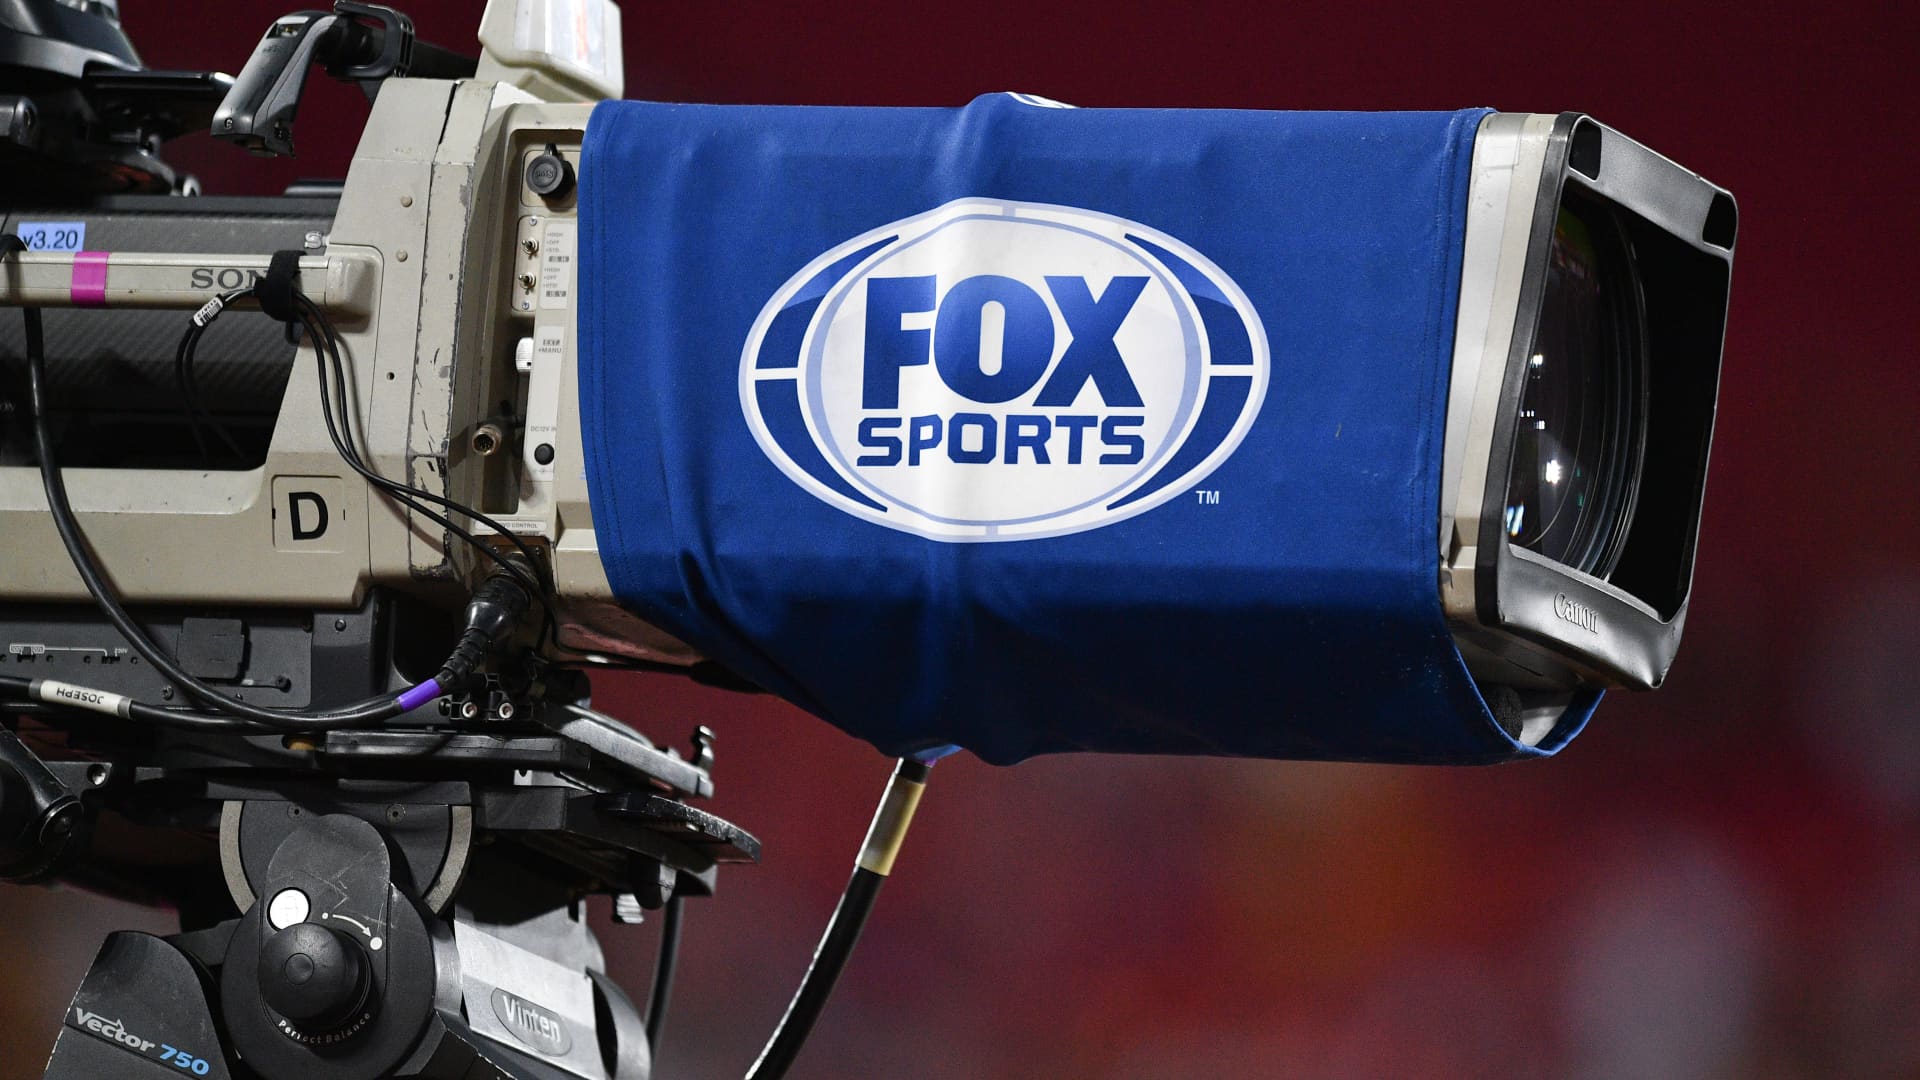 Fox touts sports programming performance even as costs rise